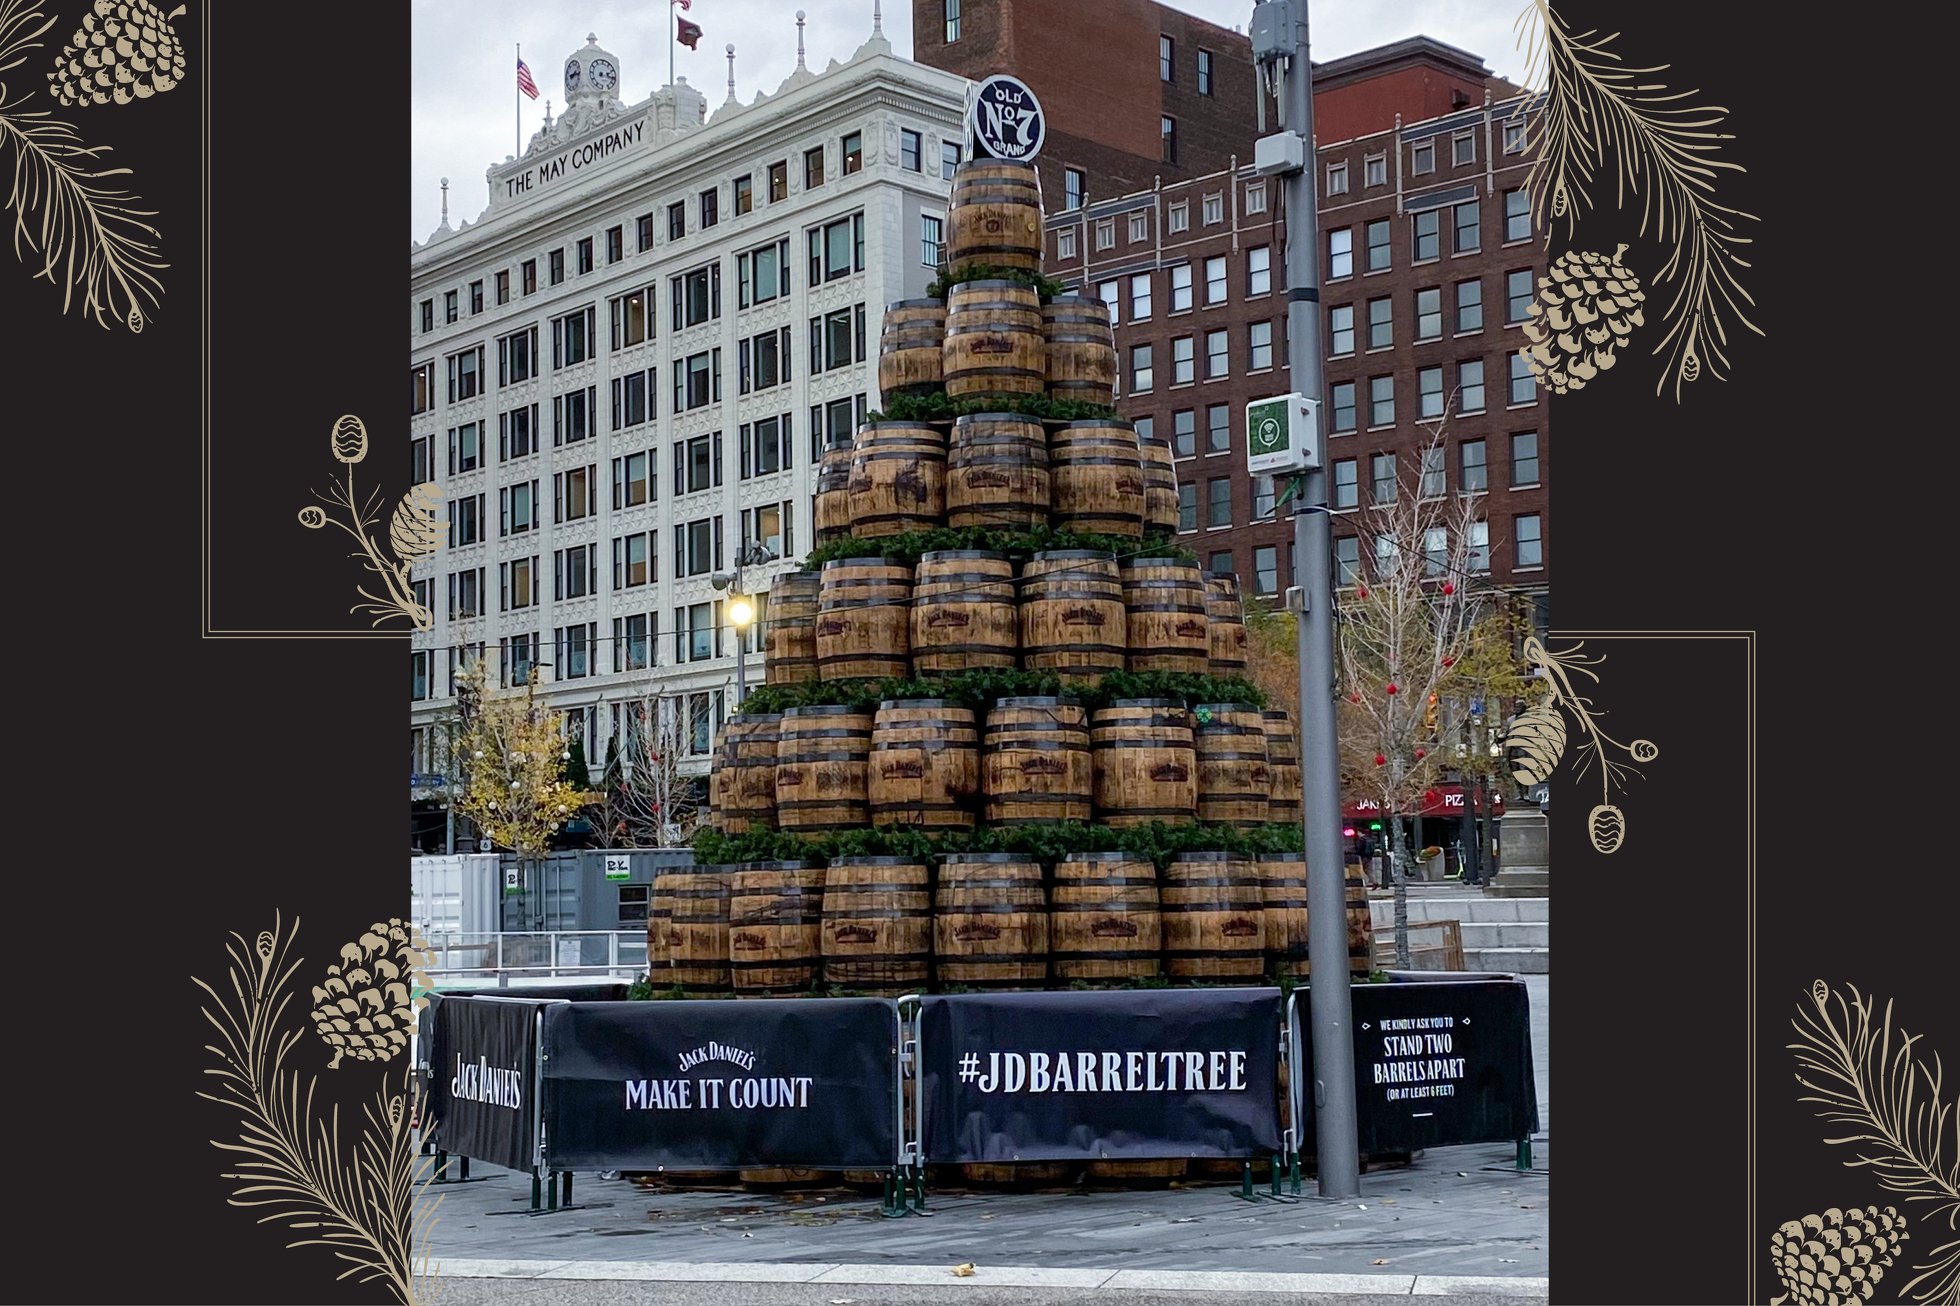 Top Barrel of the Holiday Tree from Cleveland